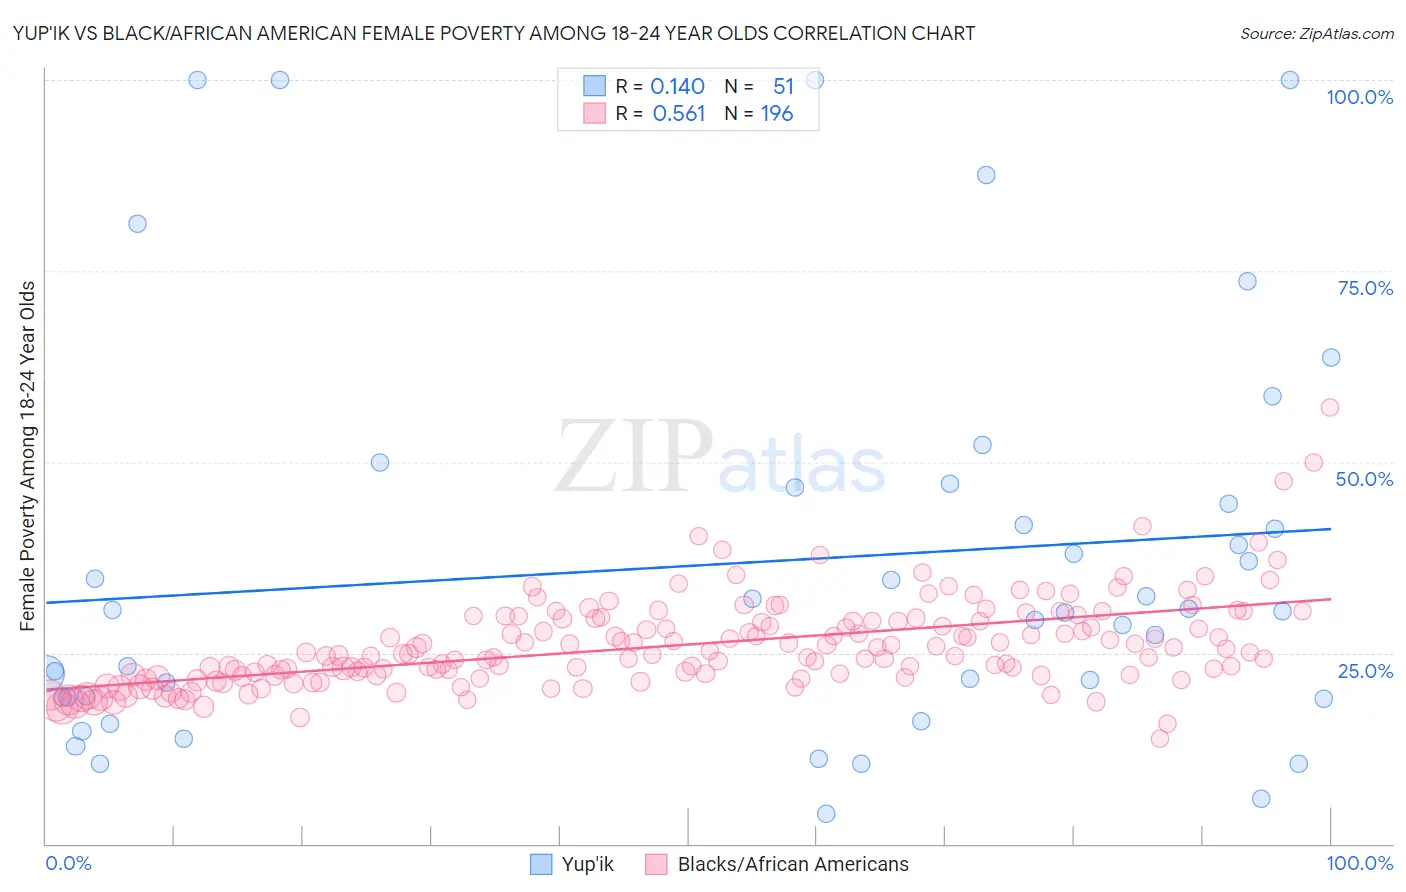 Yup'ik vs Black/African American Female Poverty Among 18-24 Year Olds